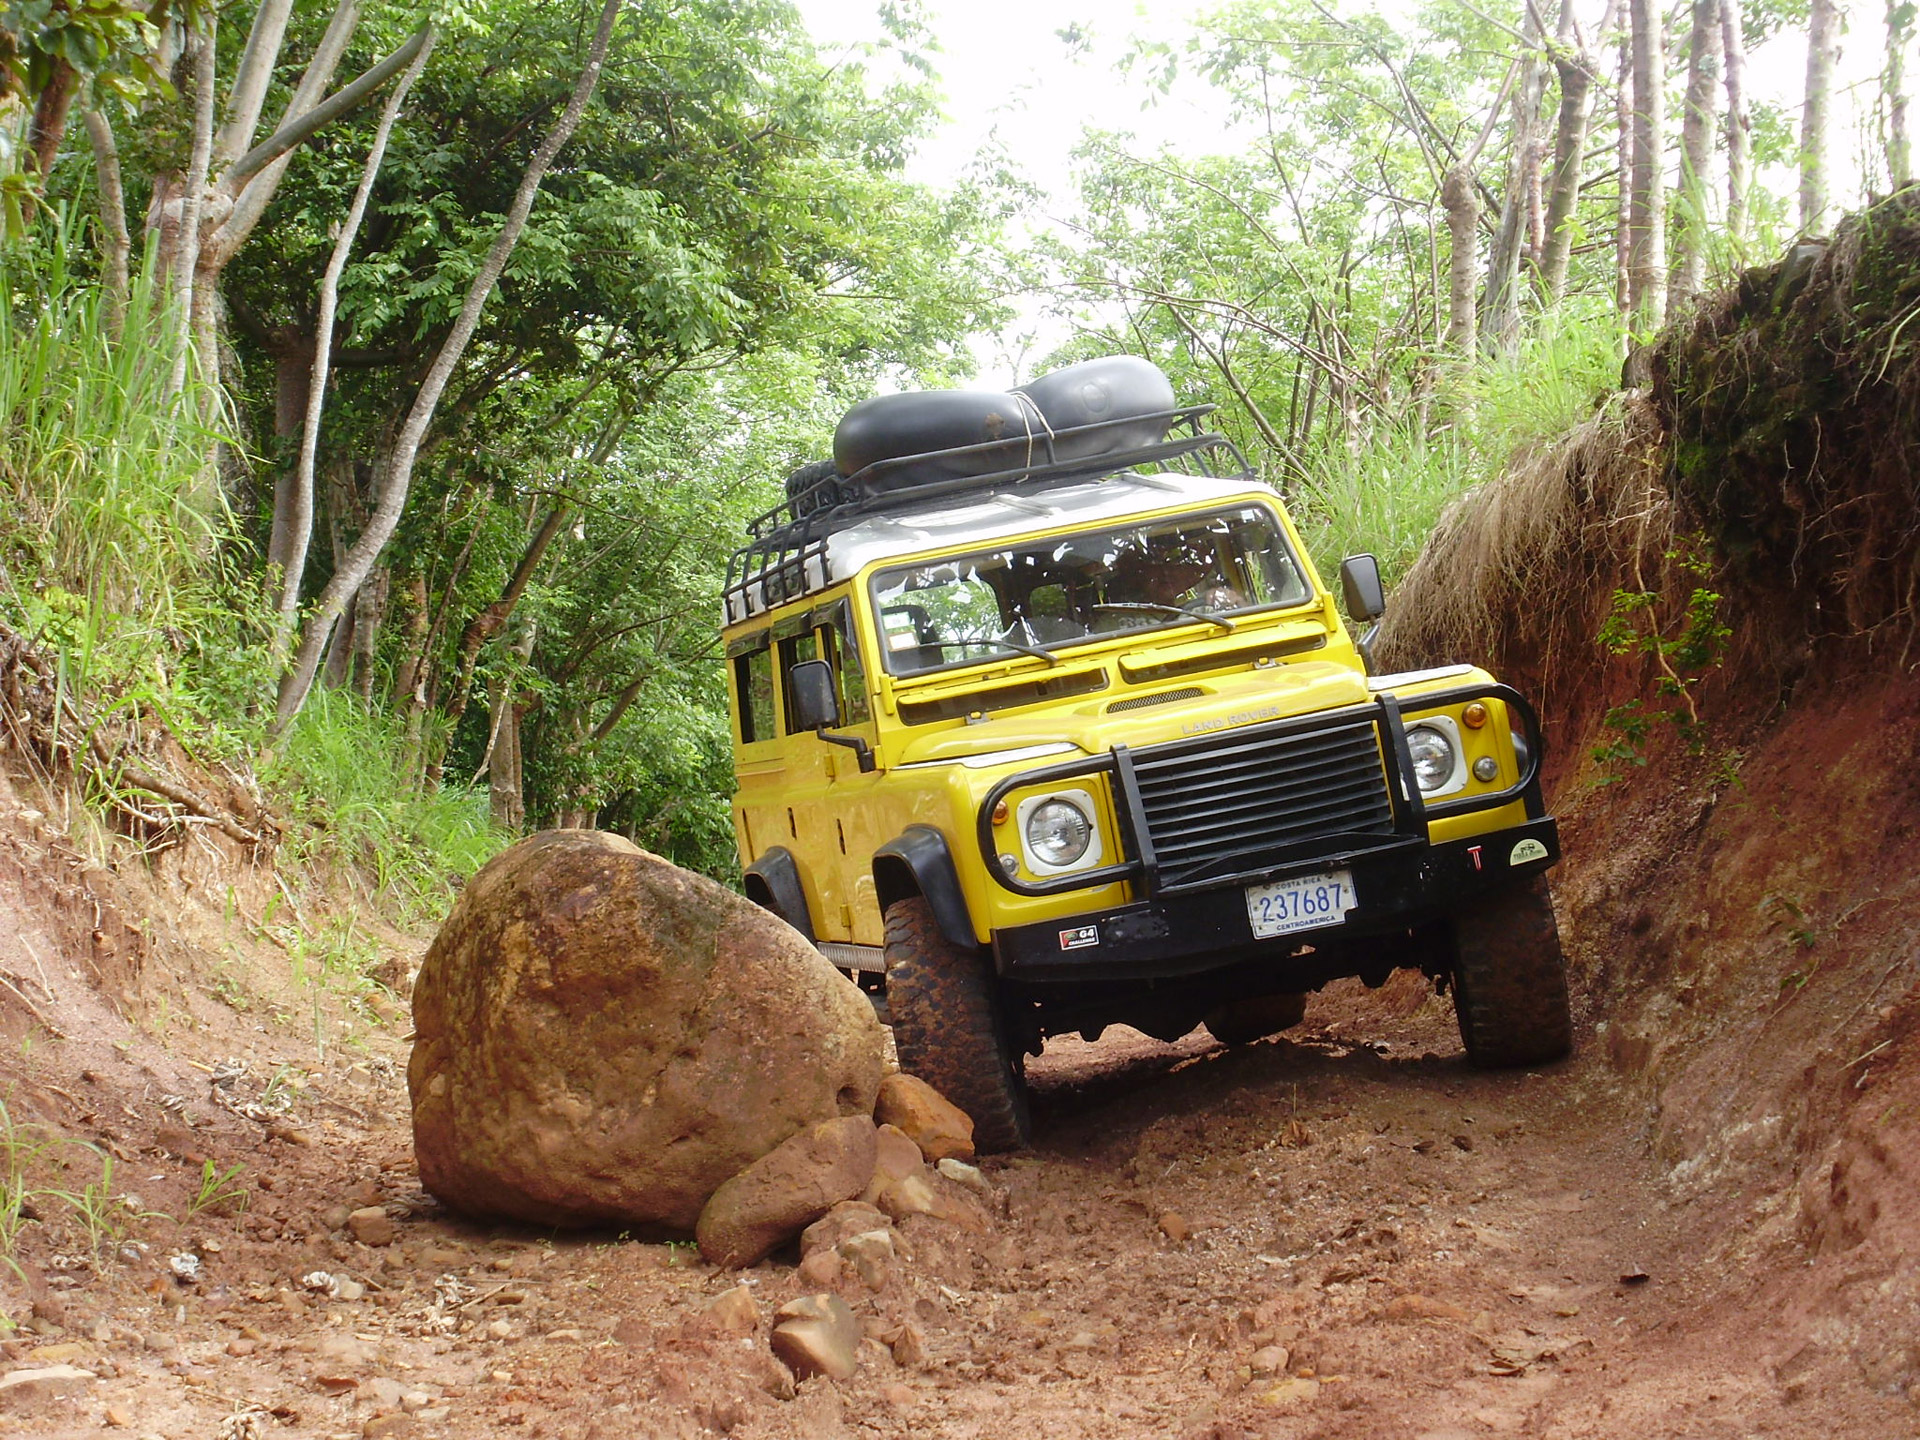 Land Rover on the way to the river pauses for a fallen rock